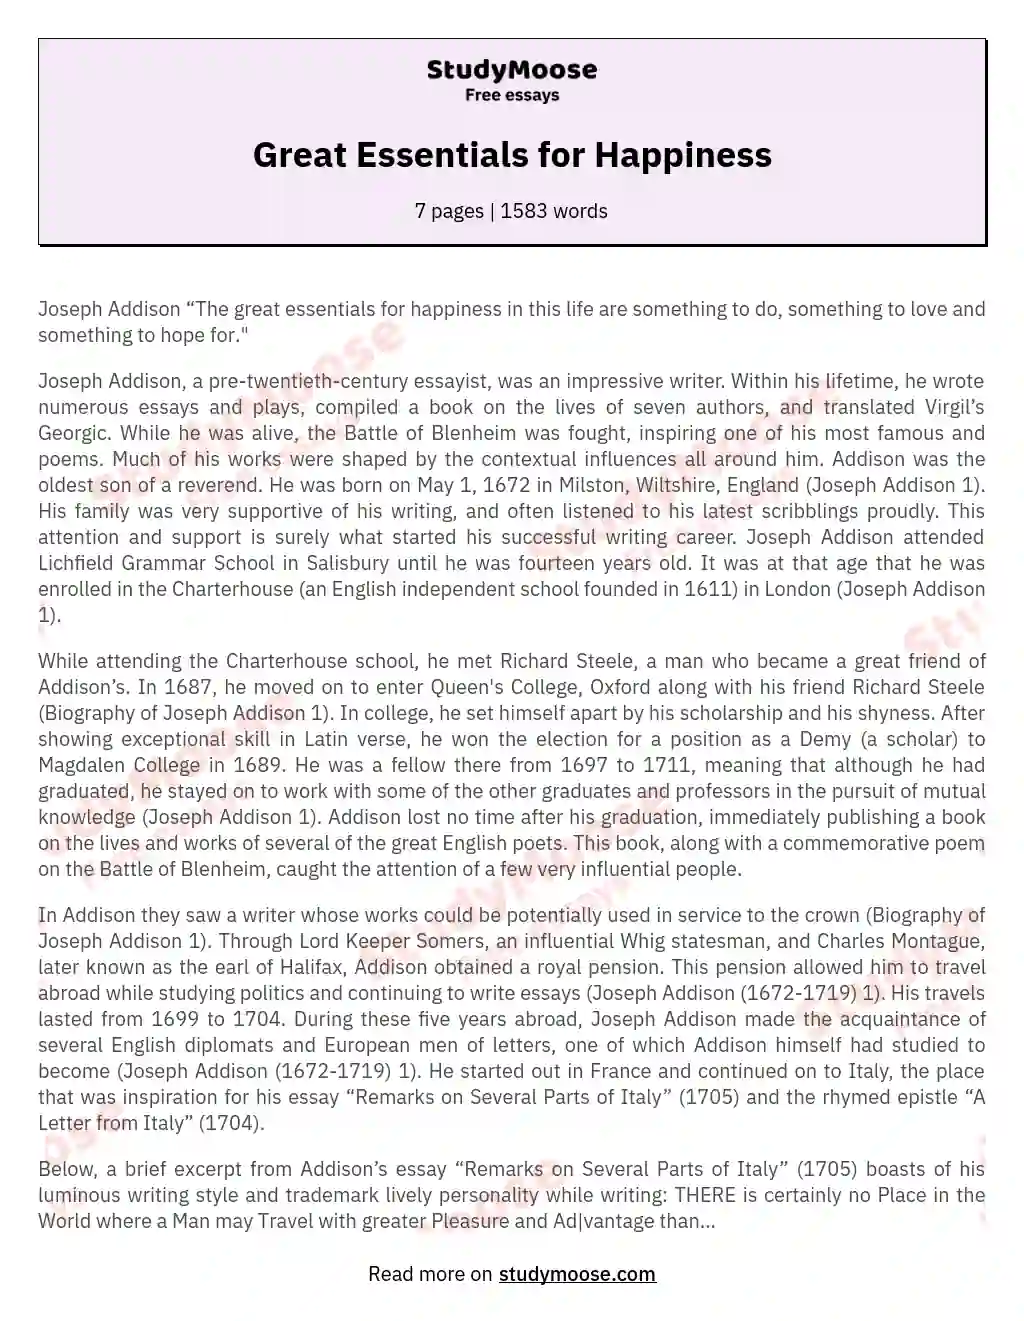 Great Essentials for Happiness essay